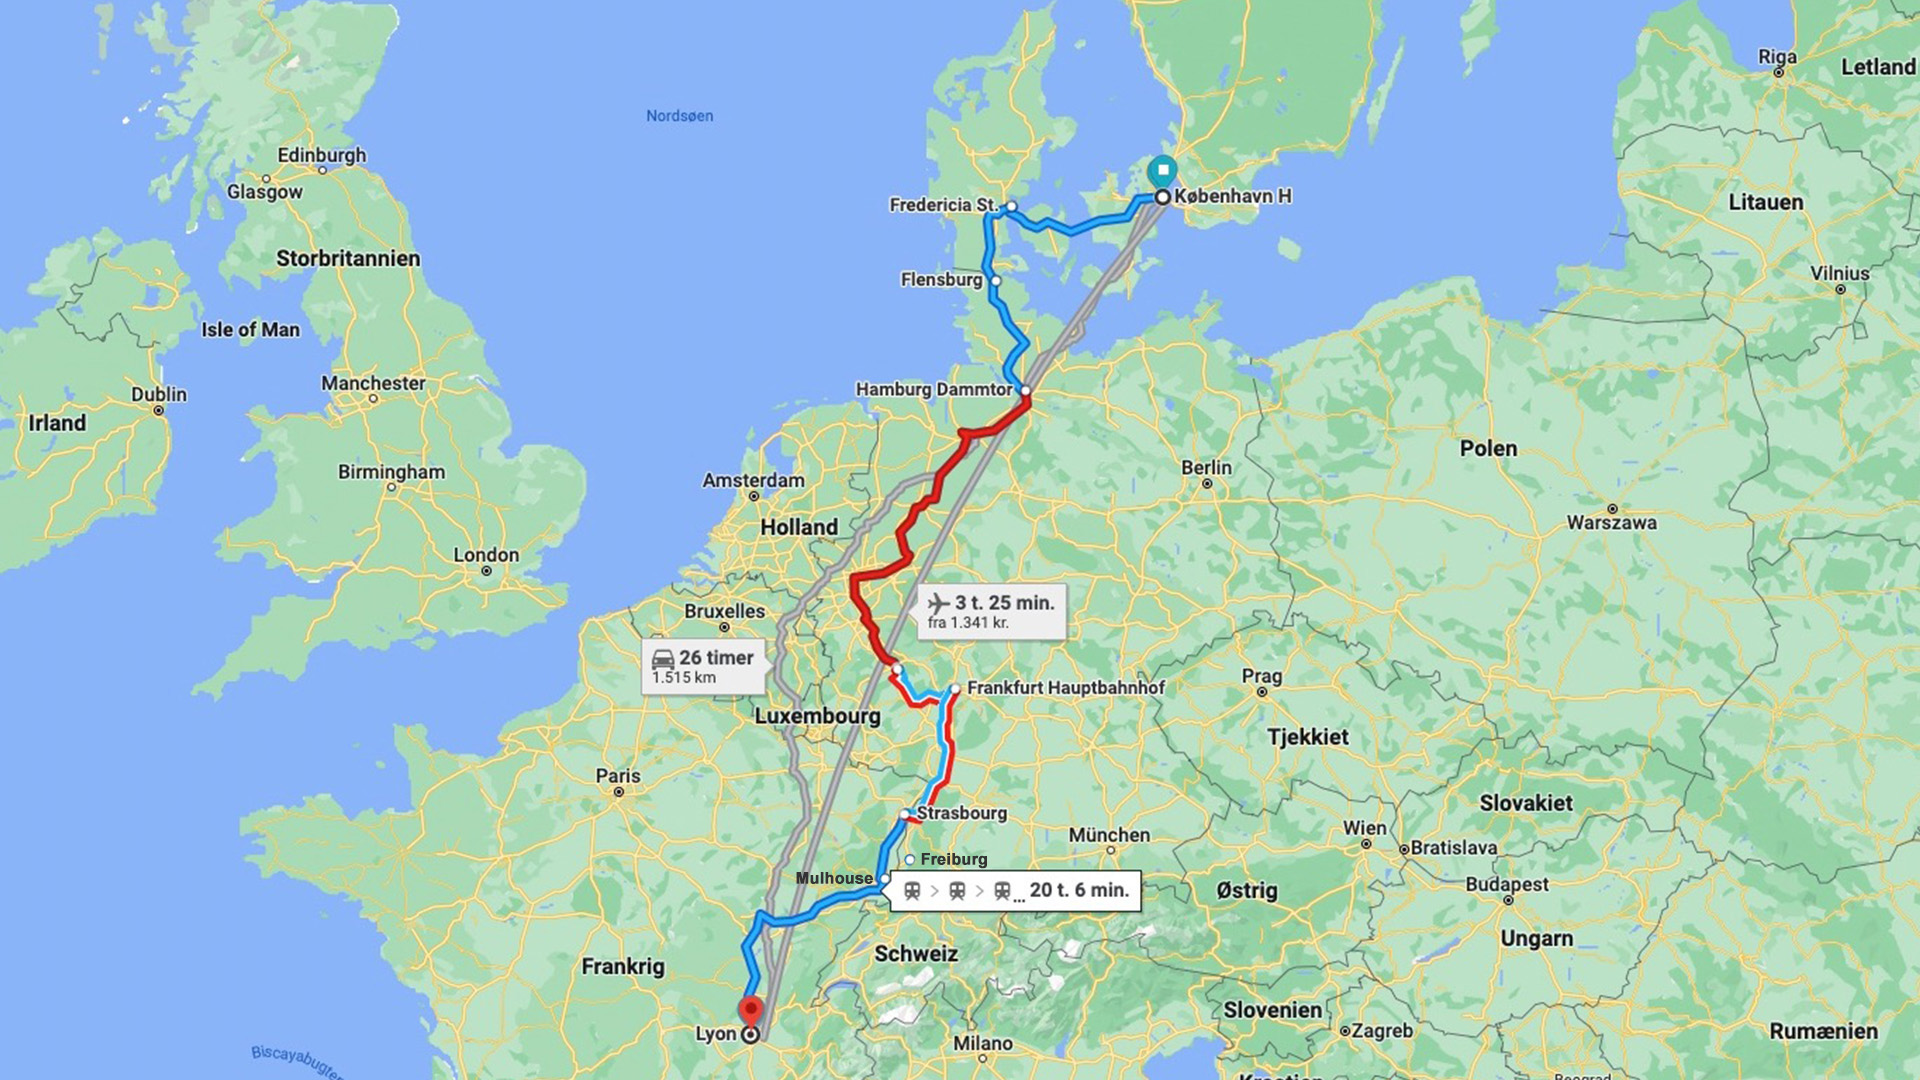 Google Maps route guidance with three different routes (plane, train, car) on the same map.